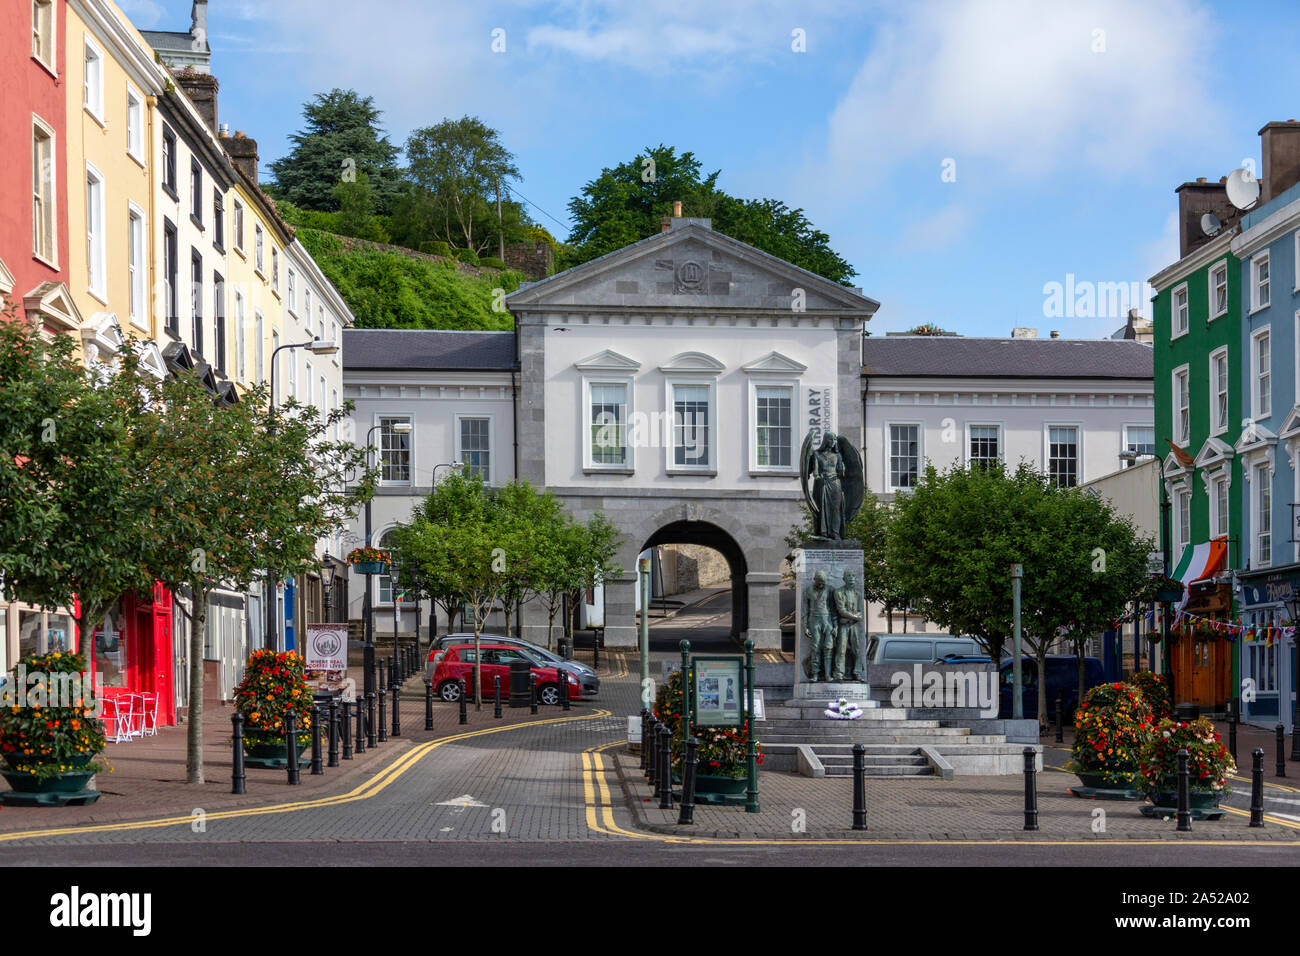 Cobh. Ireland. 06.12.16. The Town Square and Library in the seaport of Cobh (known from 1849 to 1920 as Queenstown) in the Republic of Ireland. Stock Photo